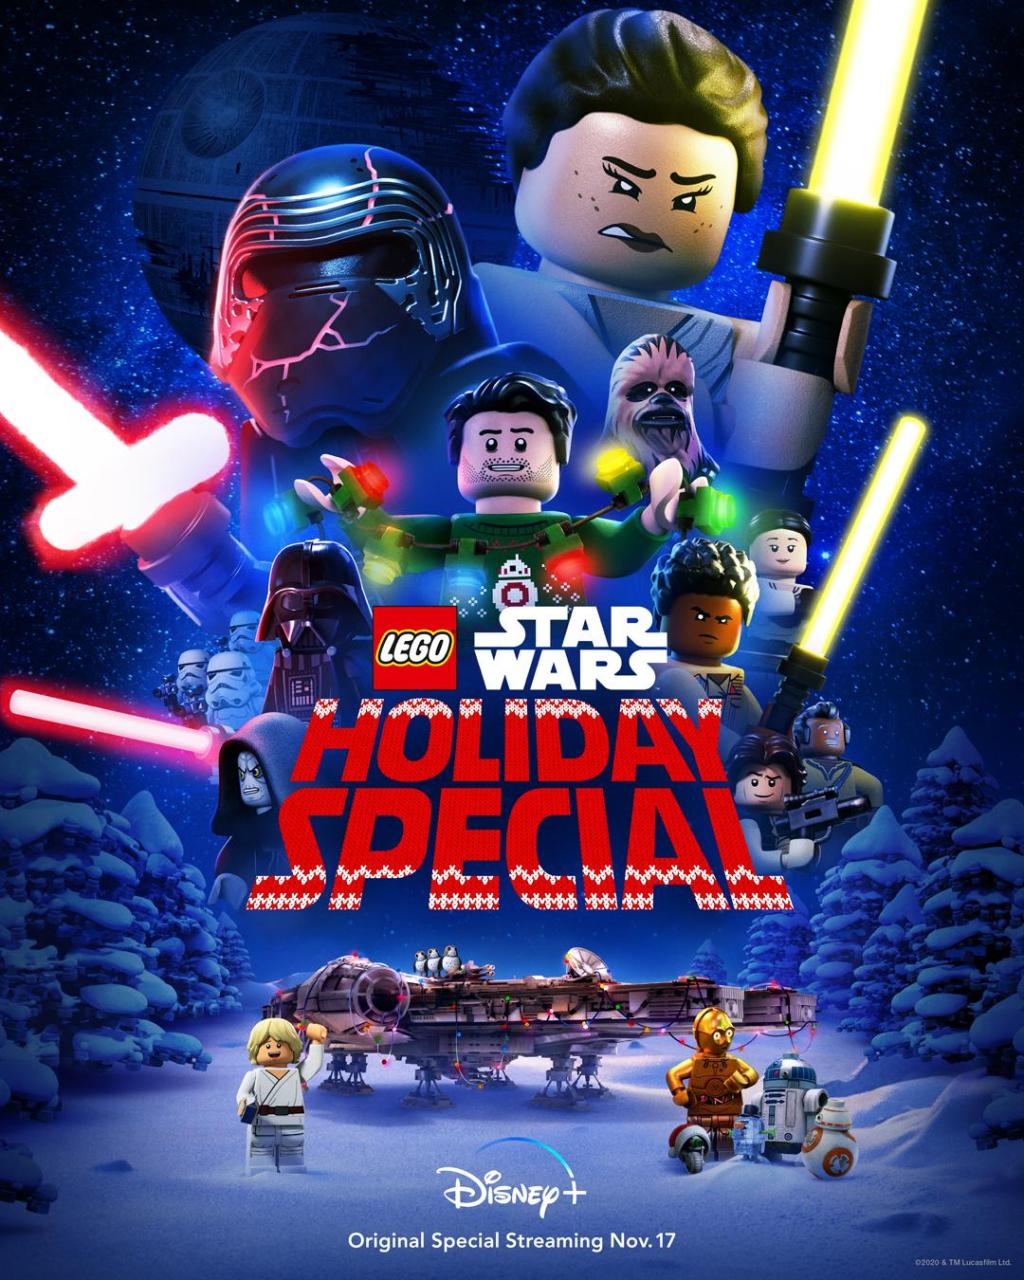 LEGO Star Wars Holiday Special Review